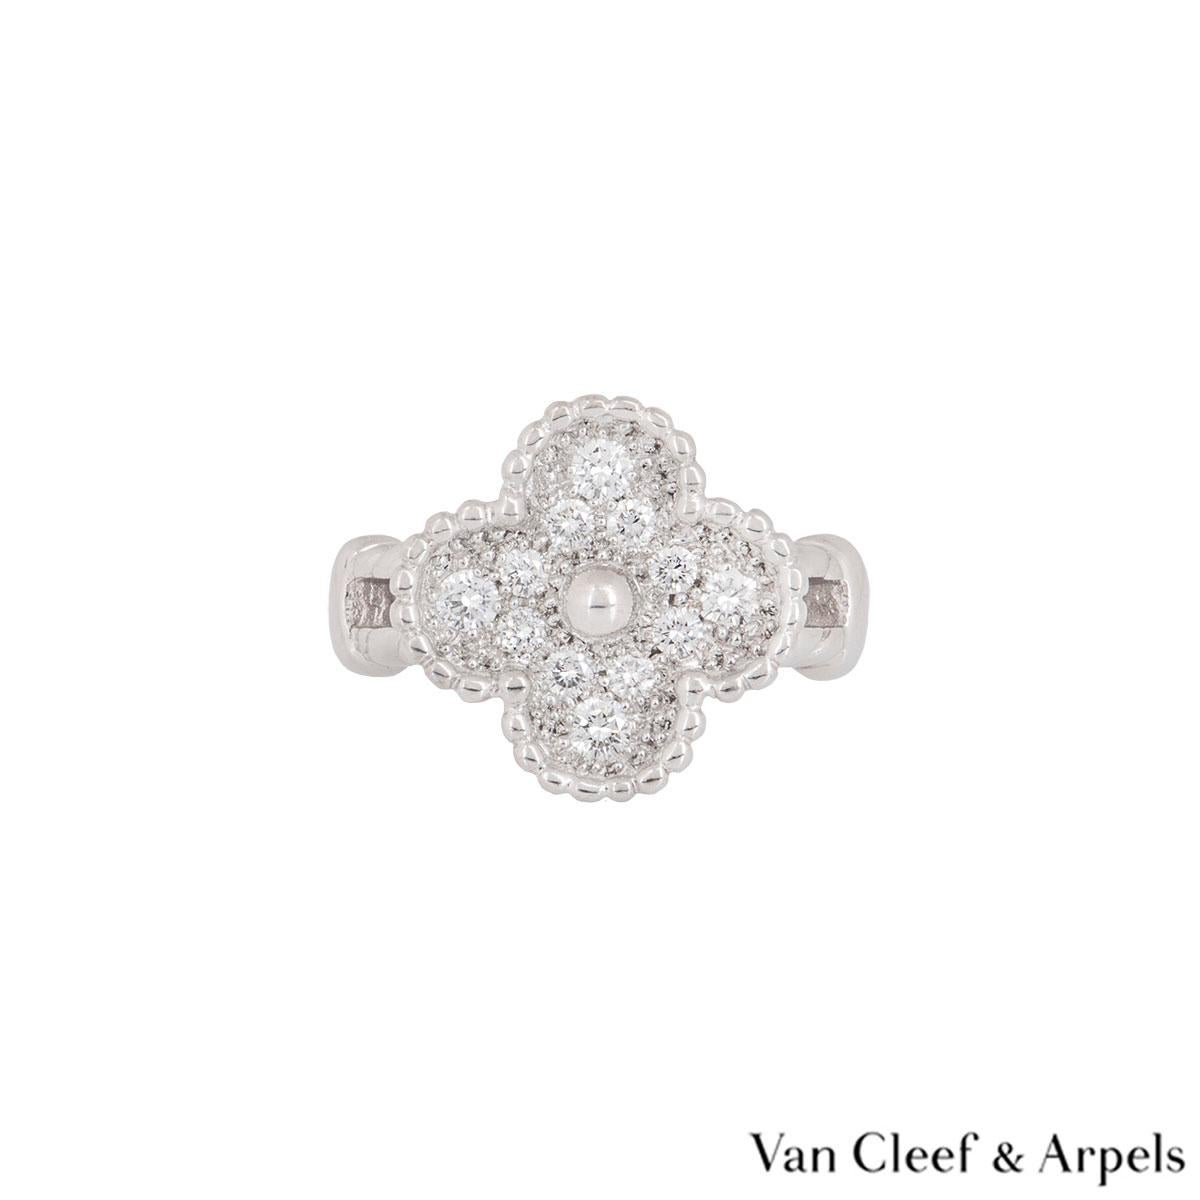 A beautiful 18k white gold Van Cleef & Arpels diamond ring from the Alhambra collection. The ring is composed of a four leaf clover motif set with 12 round brilliant cut diamonds alternating in size weighing approximately 0.44ct. The ring is